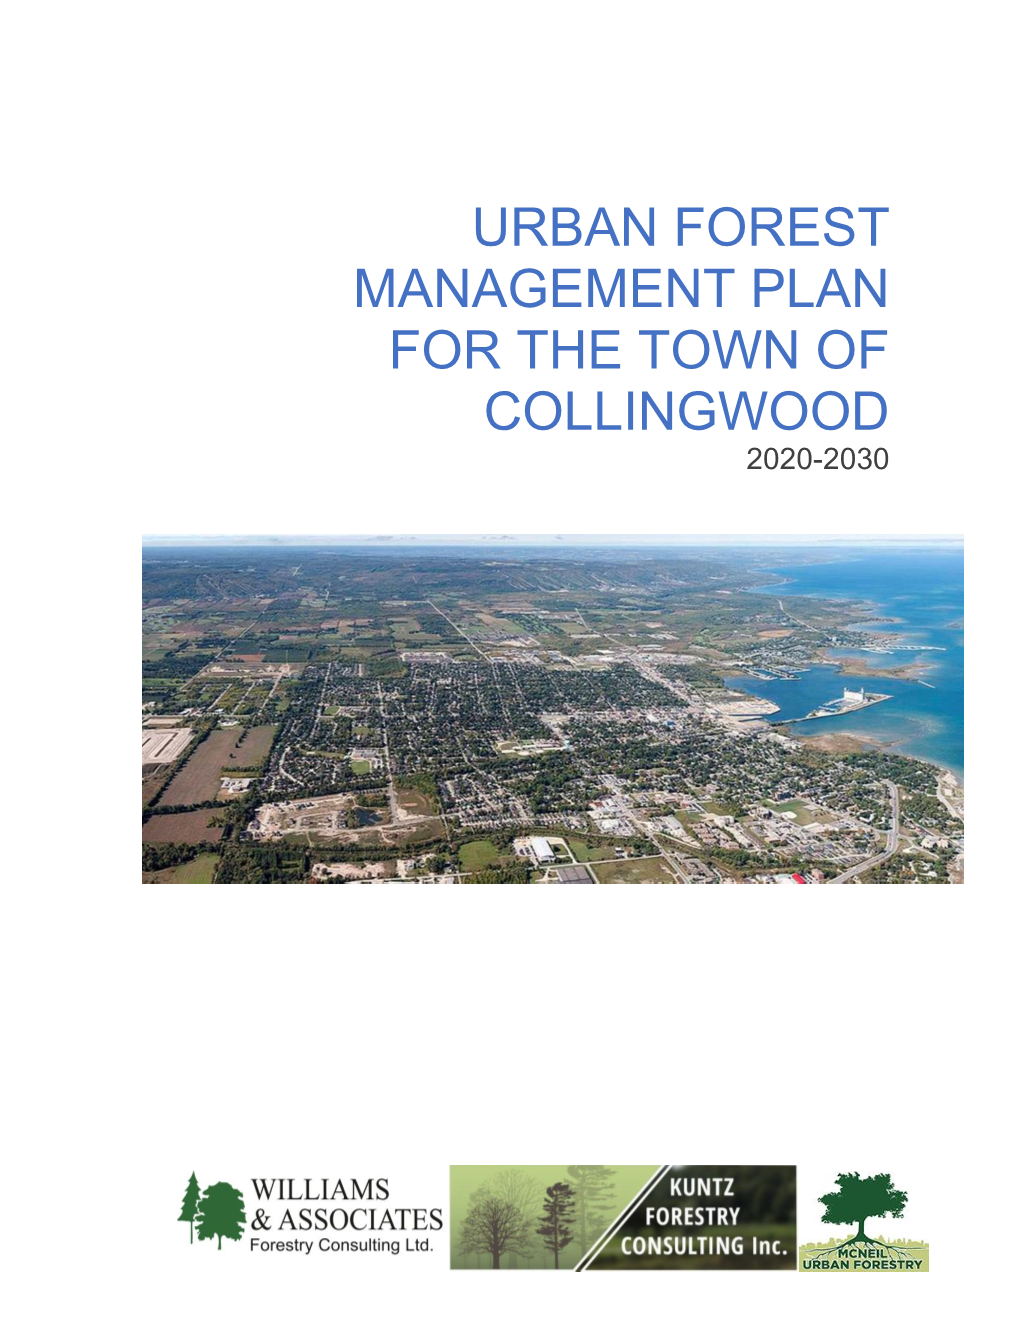 Urban Forest Management Plan for the Town of Collingwood 2020-2030